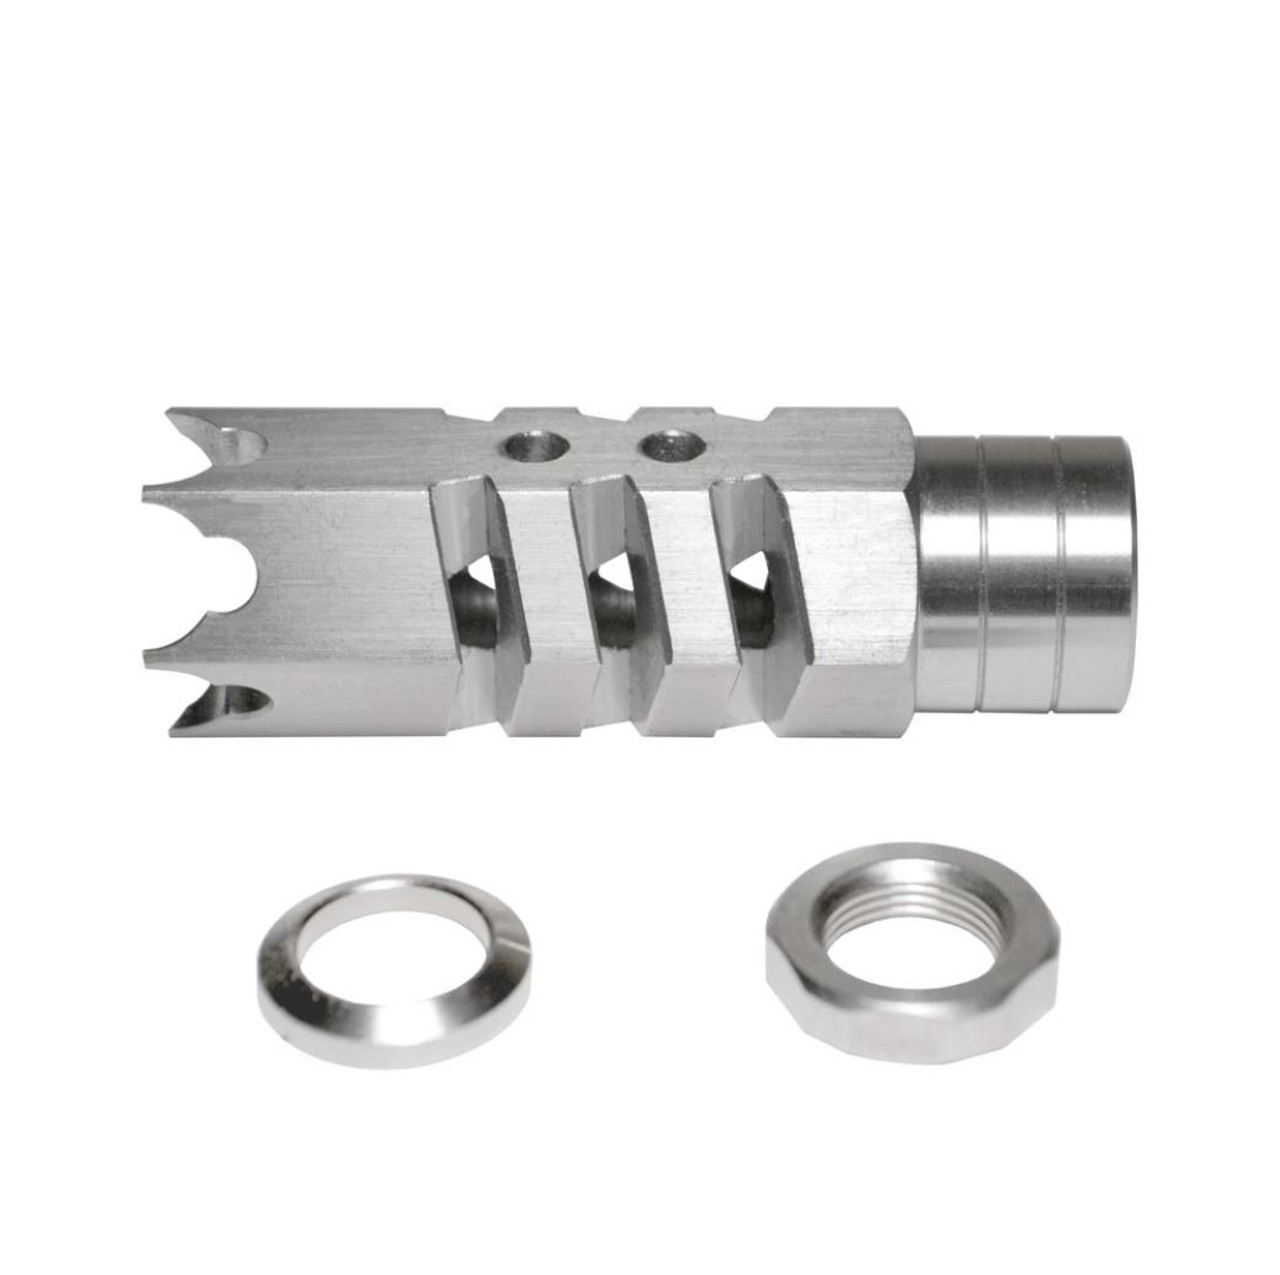 Tactical Competition Grade Muzzle Brake, 1/2x28 Stainless Steel - AR-15